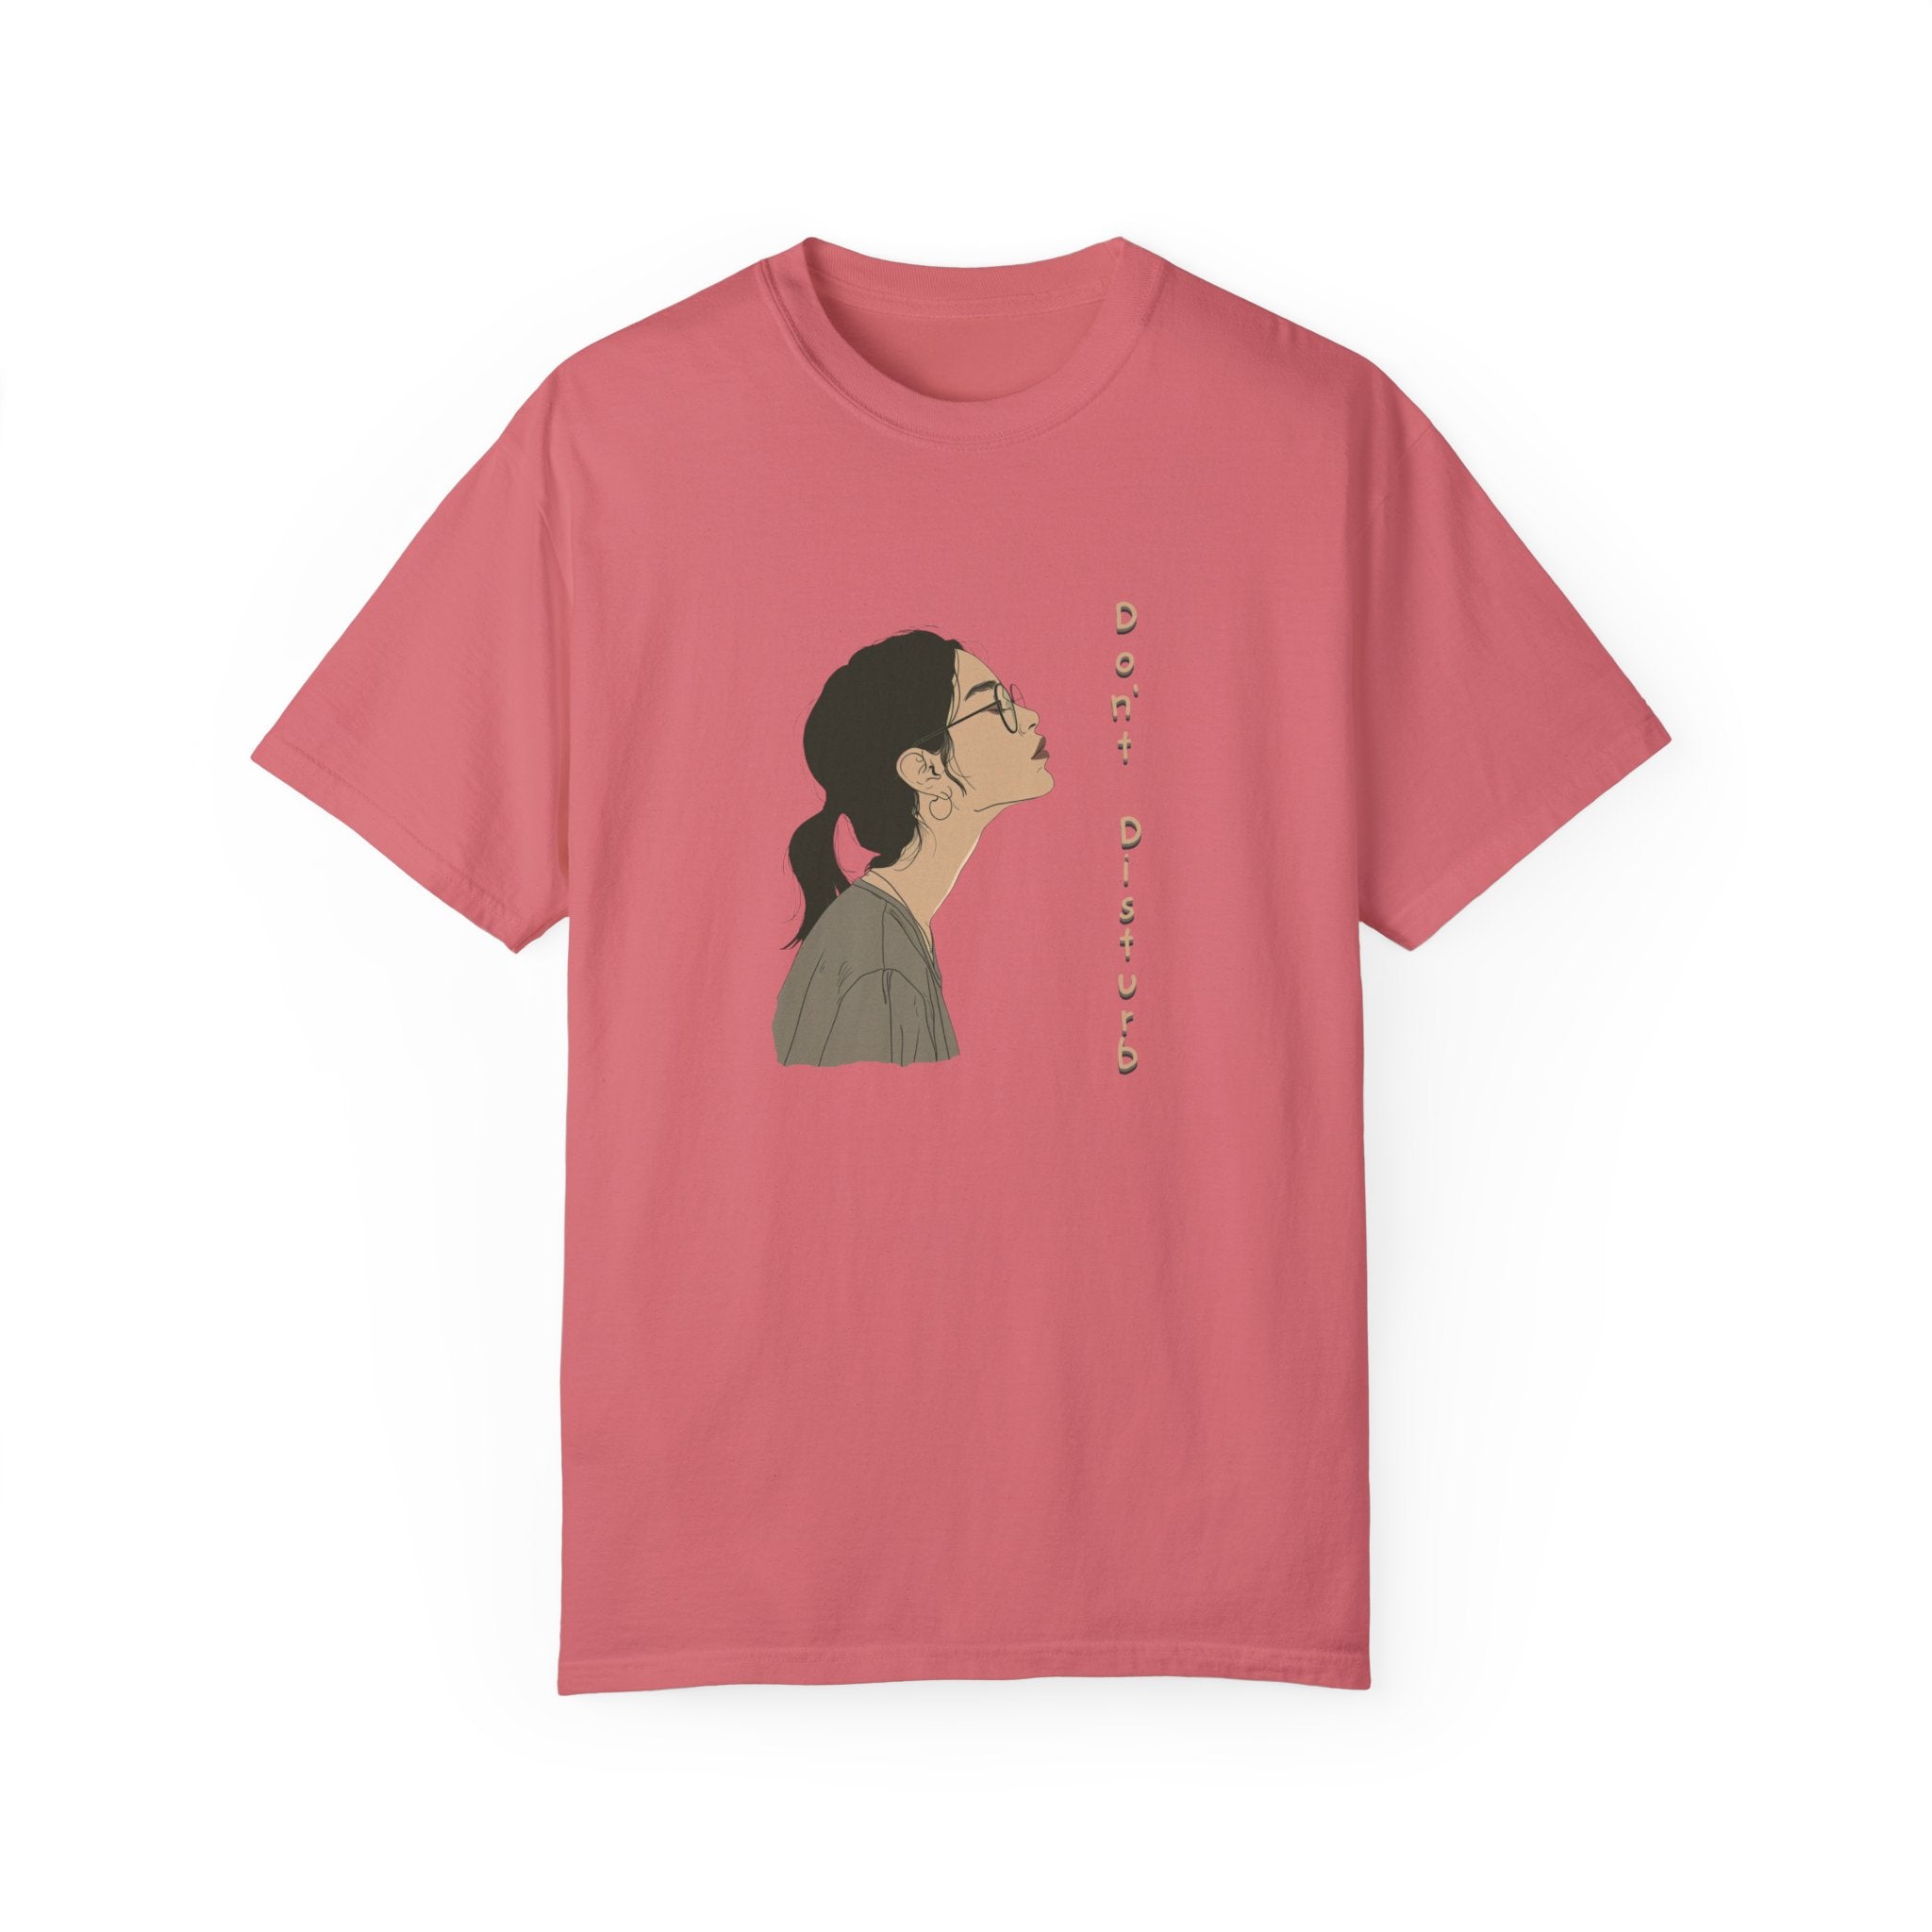 Chill Vibes: Cool T Shirt for Women with 'Don't Disturb' Print Watermelon Female